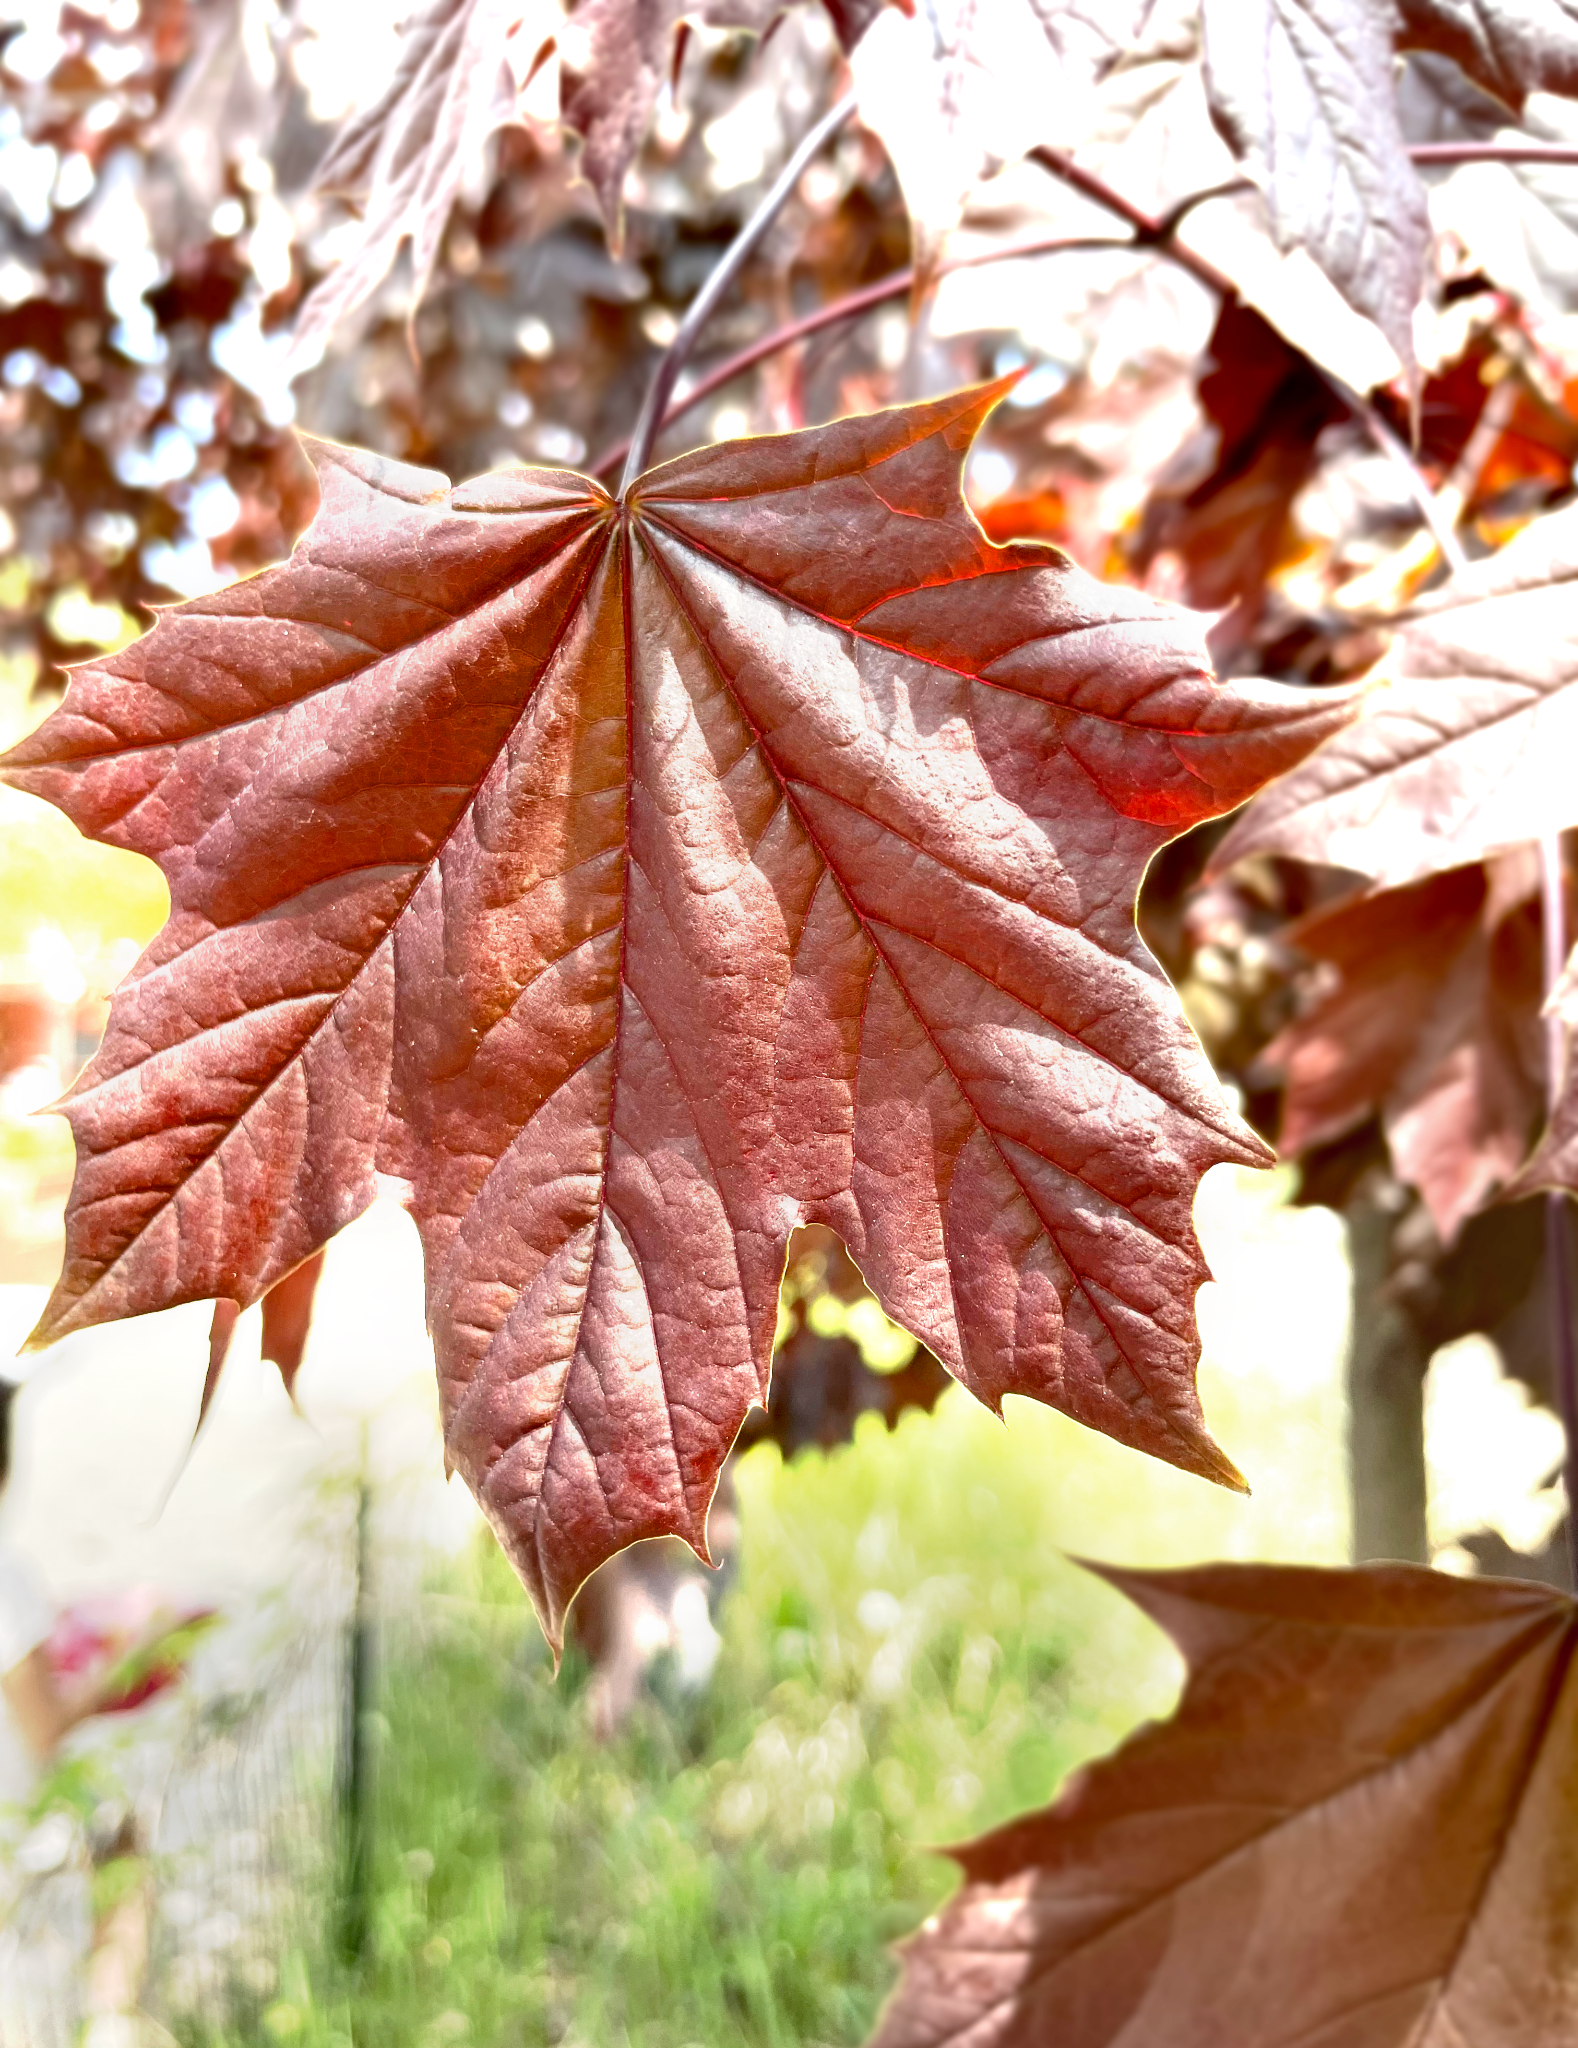 A bright red leaf hanging a tree